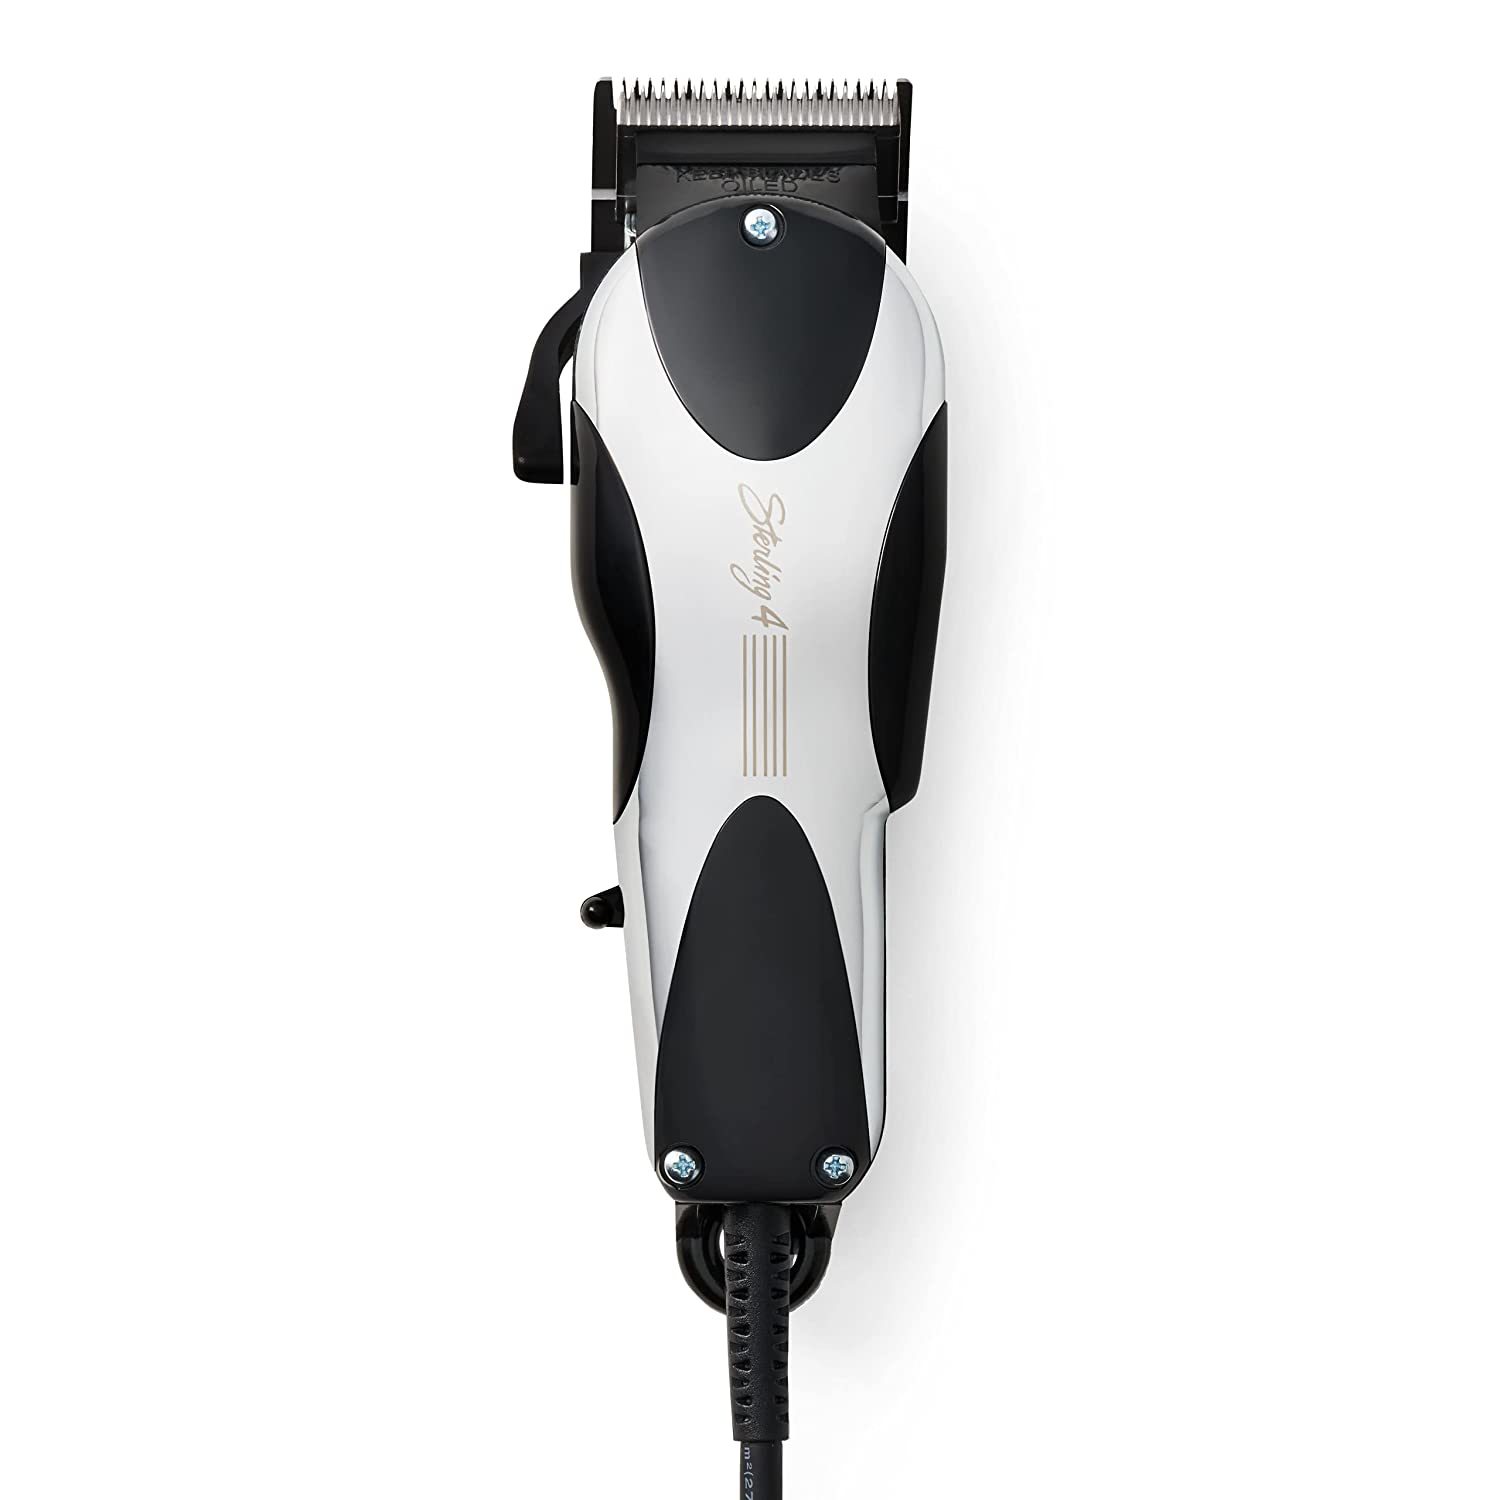 Wahl Professional - Sterling 4 - Men'S Professional Hair Clippers - Barber - $99.96